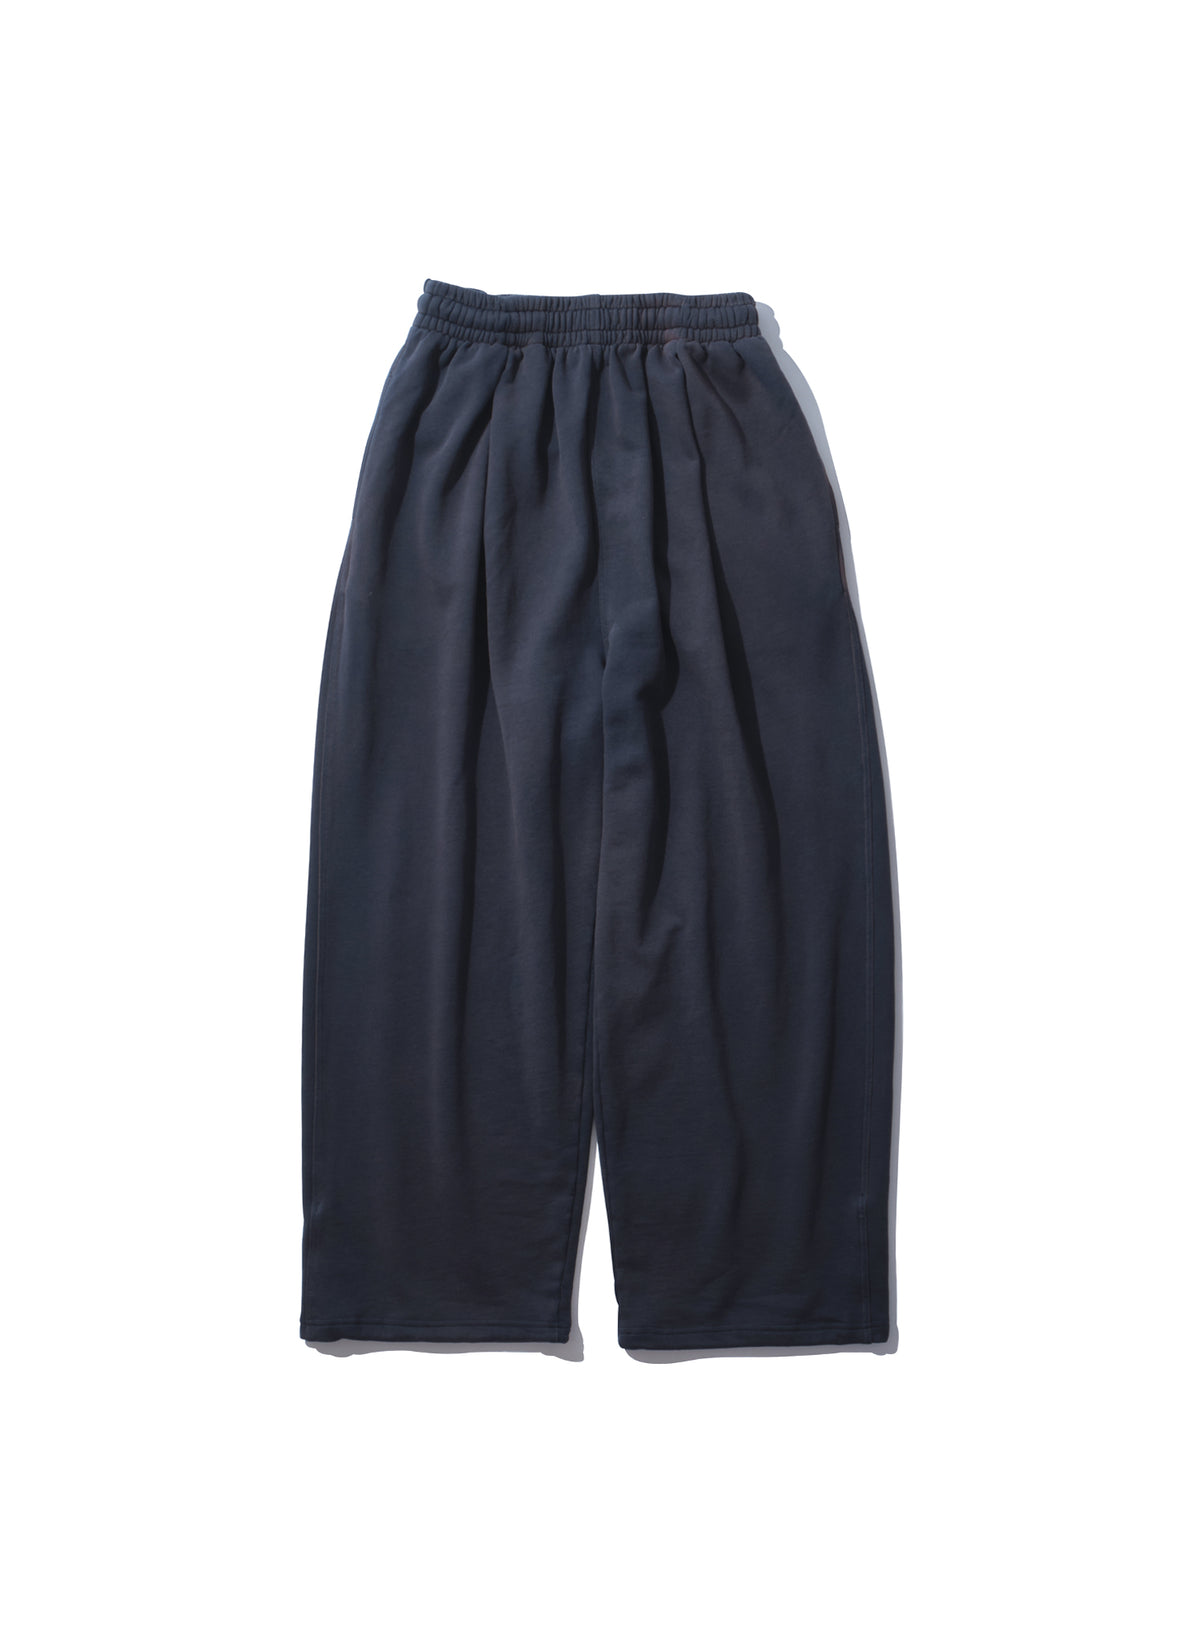 <span style="color: #f50b0b;">Last One</span> WILLY CHAVARRIA / NORTHSIDER JOGGER PANTS DARK NAVY